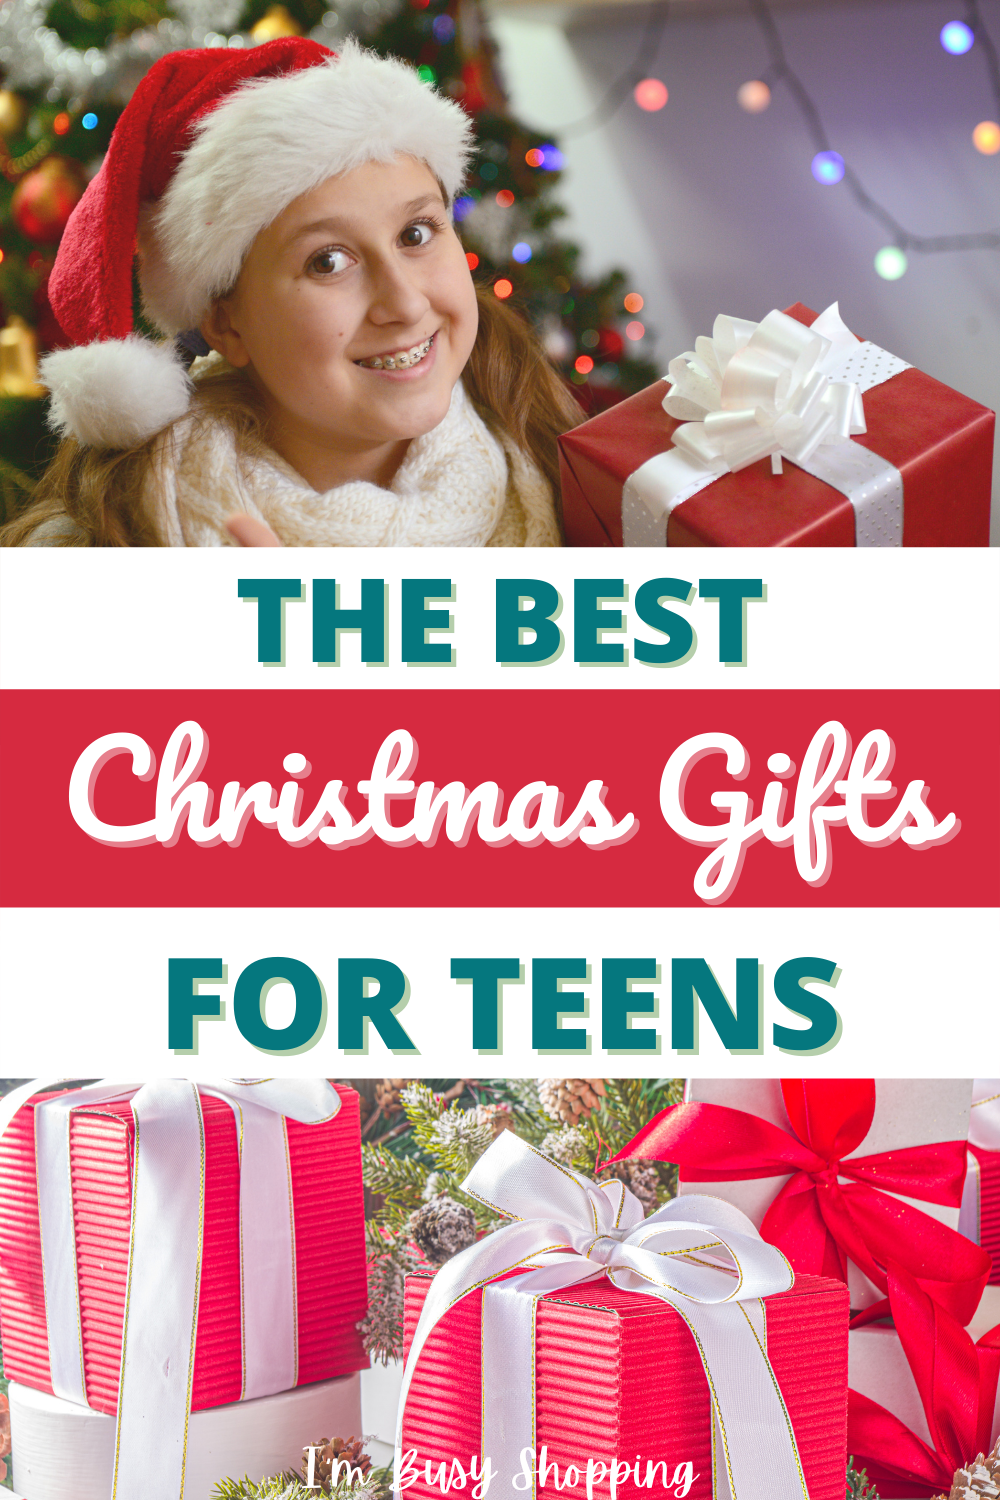 Pin showing the Best Christmas Gifts for Teens